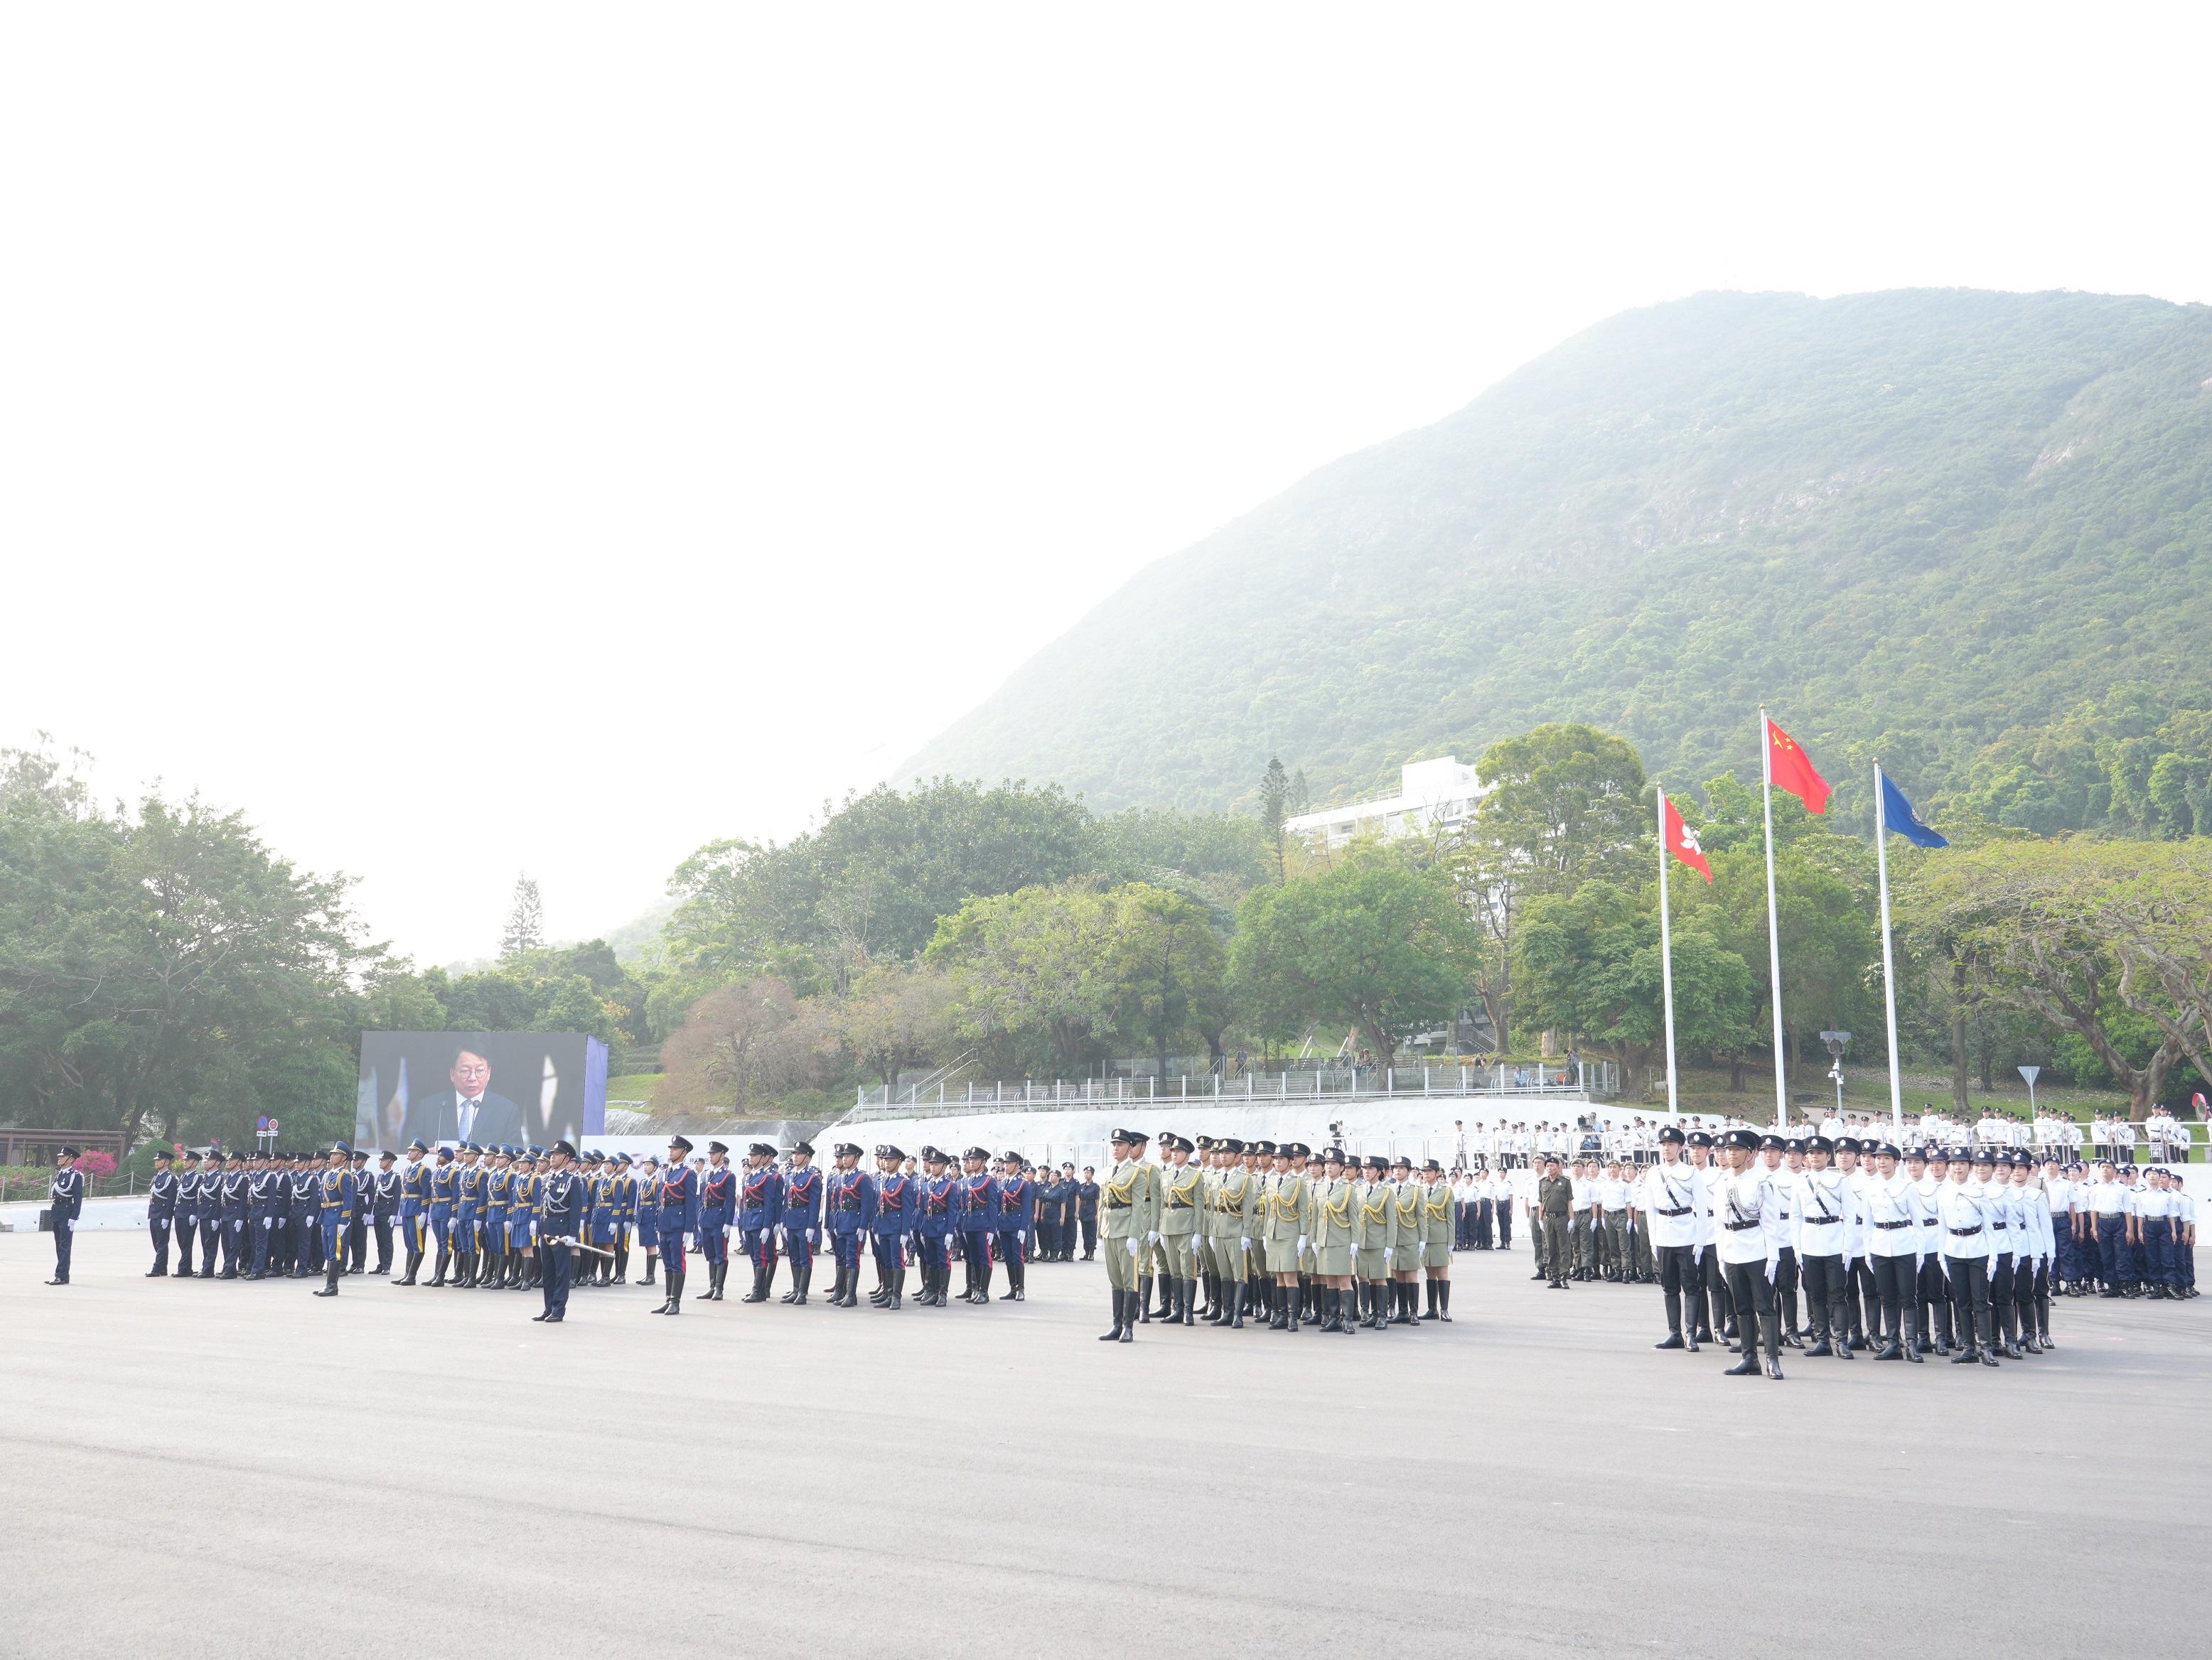 The Security Bureau and its disciplined services jointly held a National Security Education Day flag raising ceremony at the Hong Kong Police College today (April 15). Photo shows the disciplined services ceremonial guard and youth groups lining up at the flag raising ceremony.